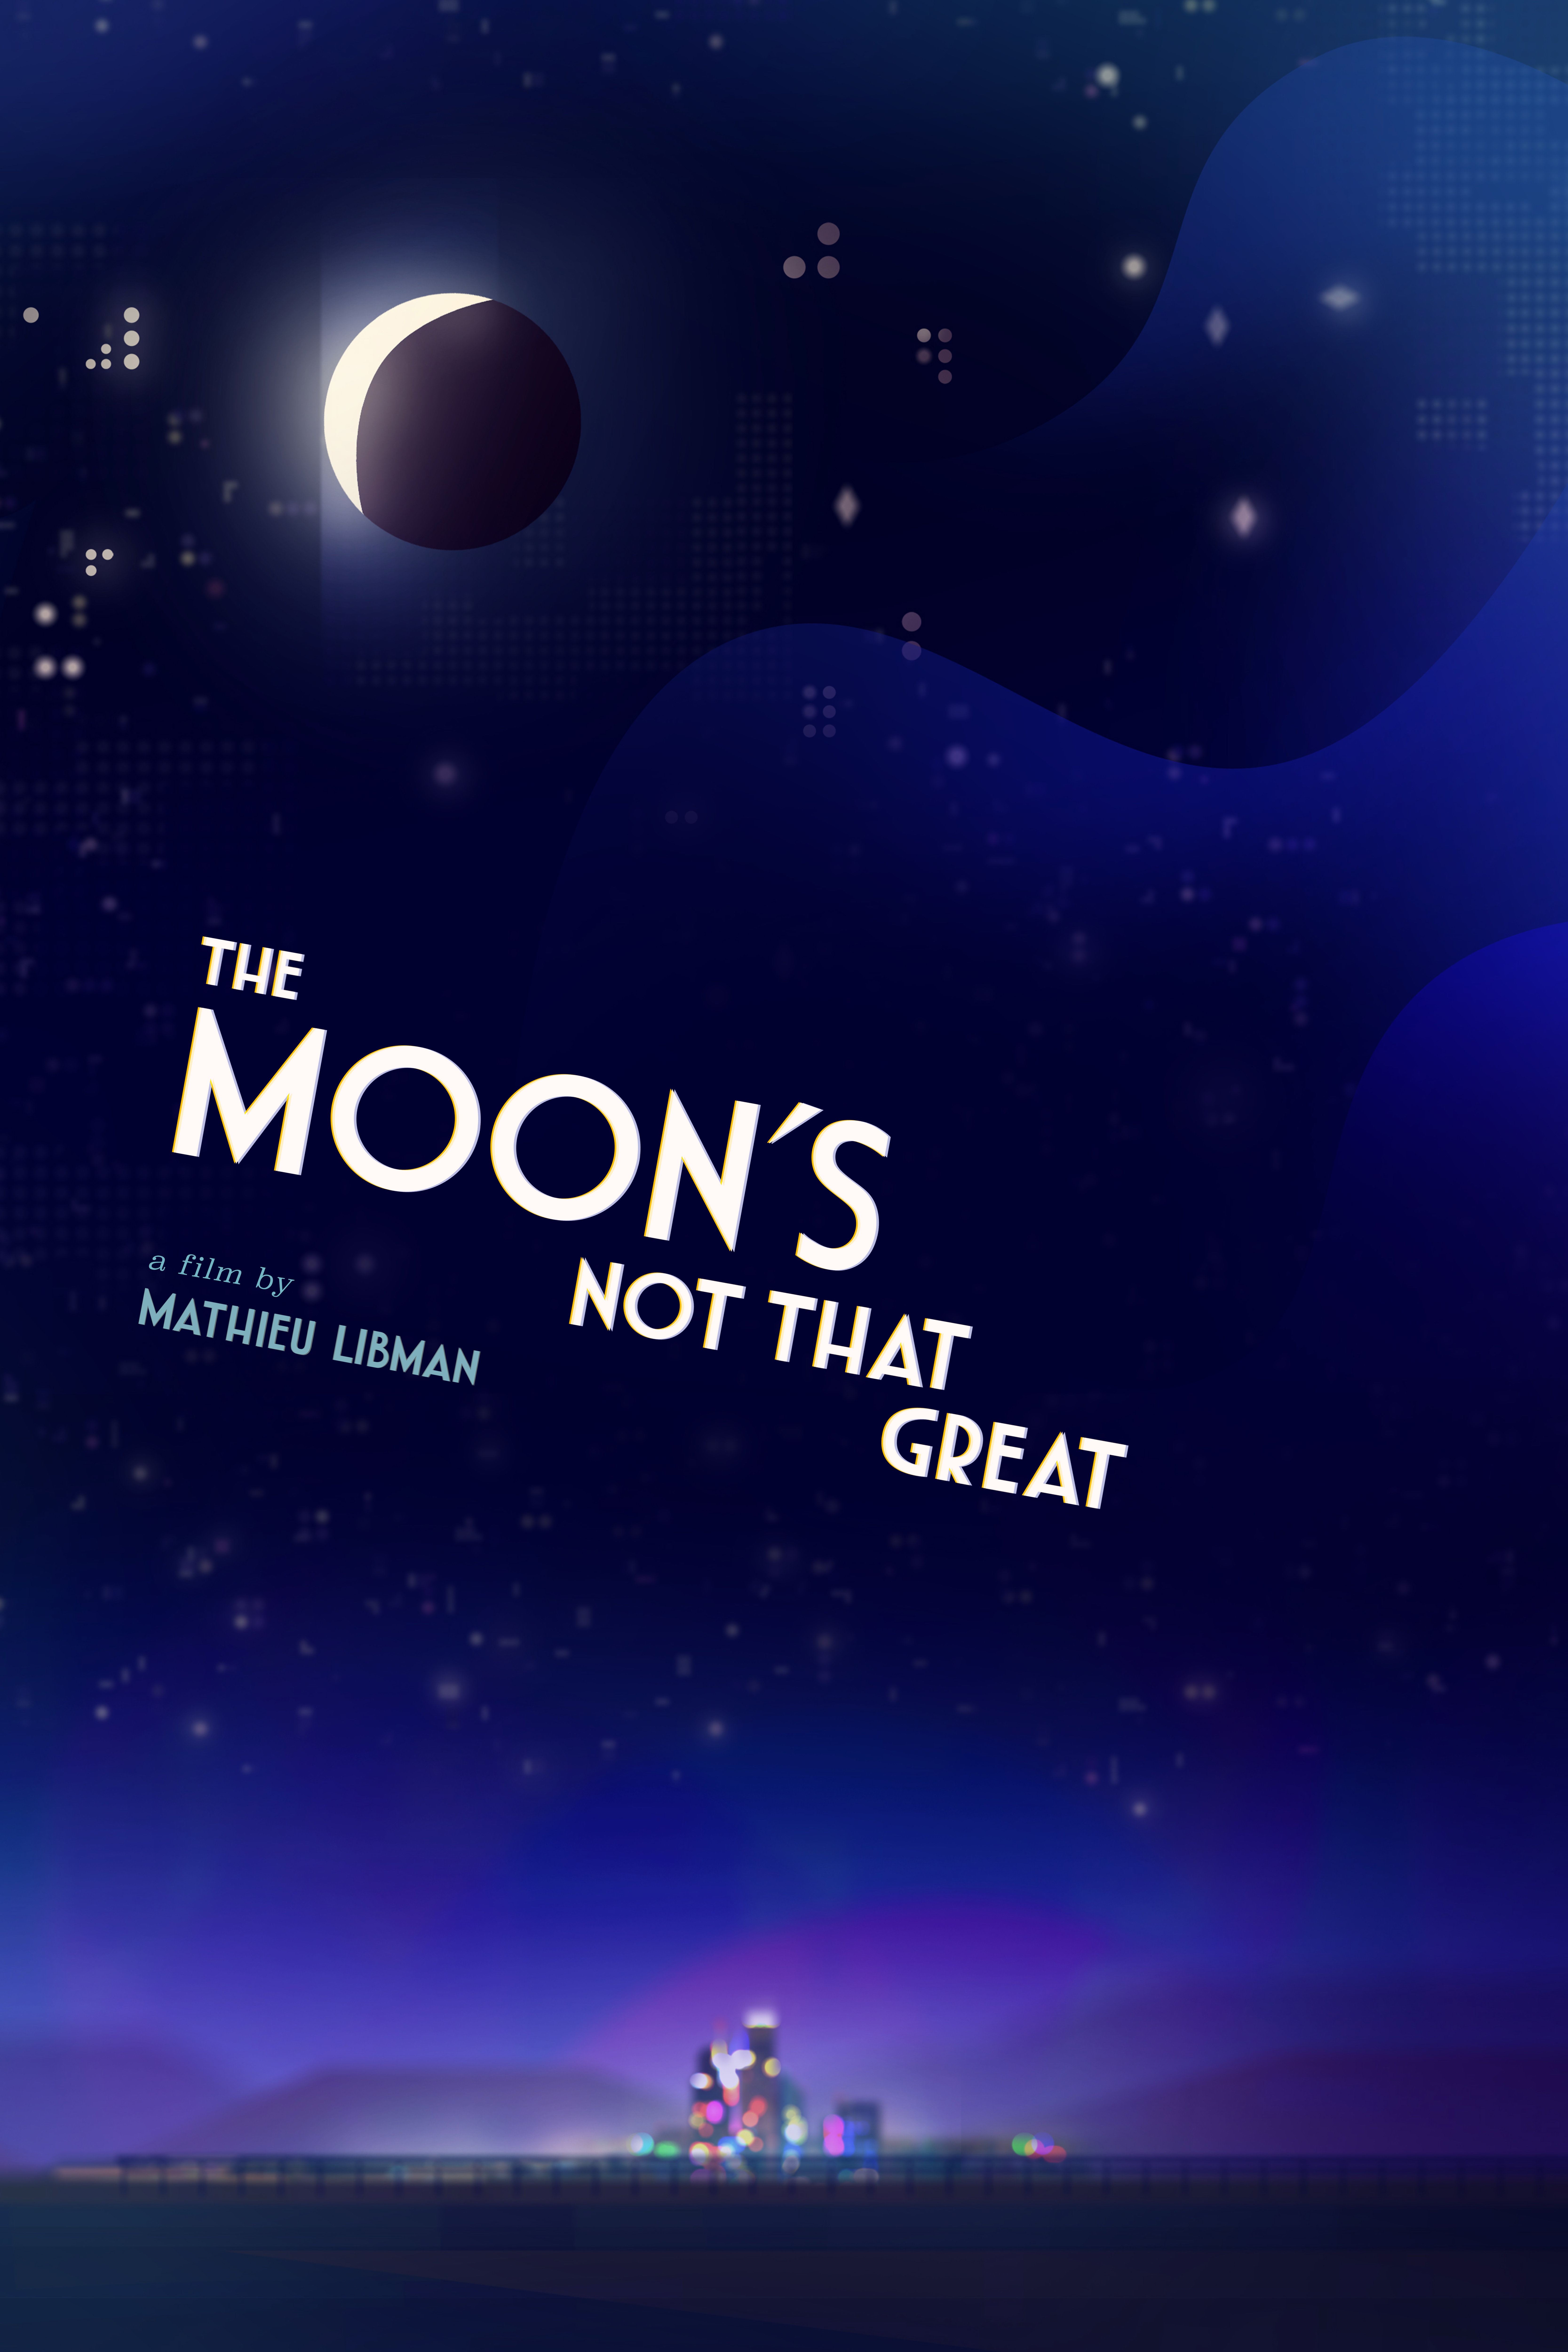 The Moon's Not That Great